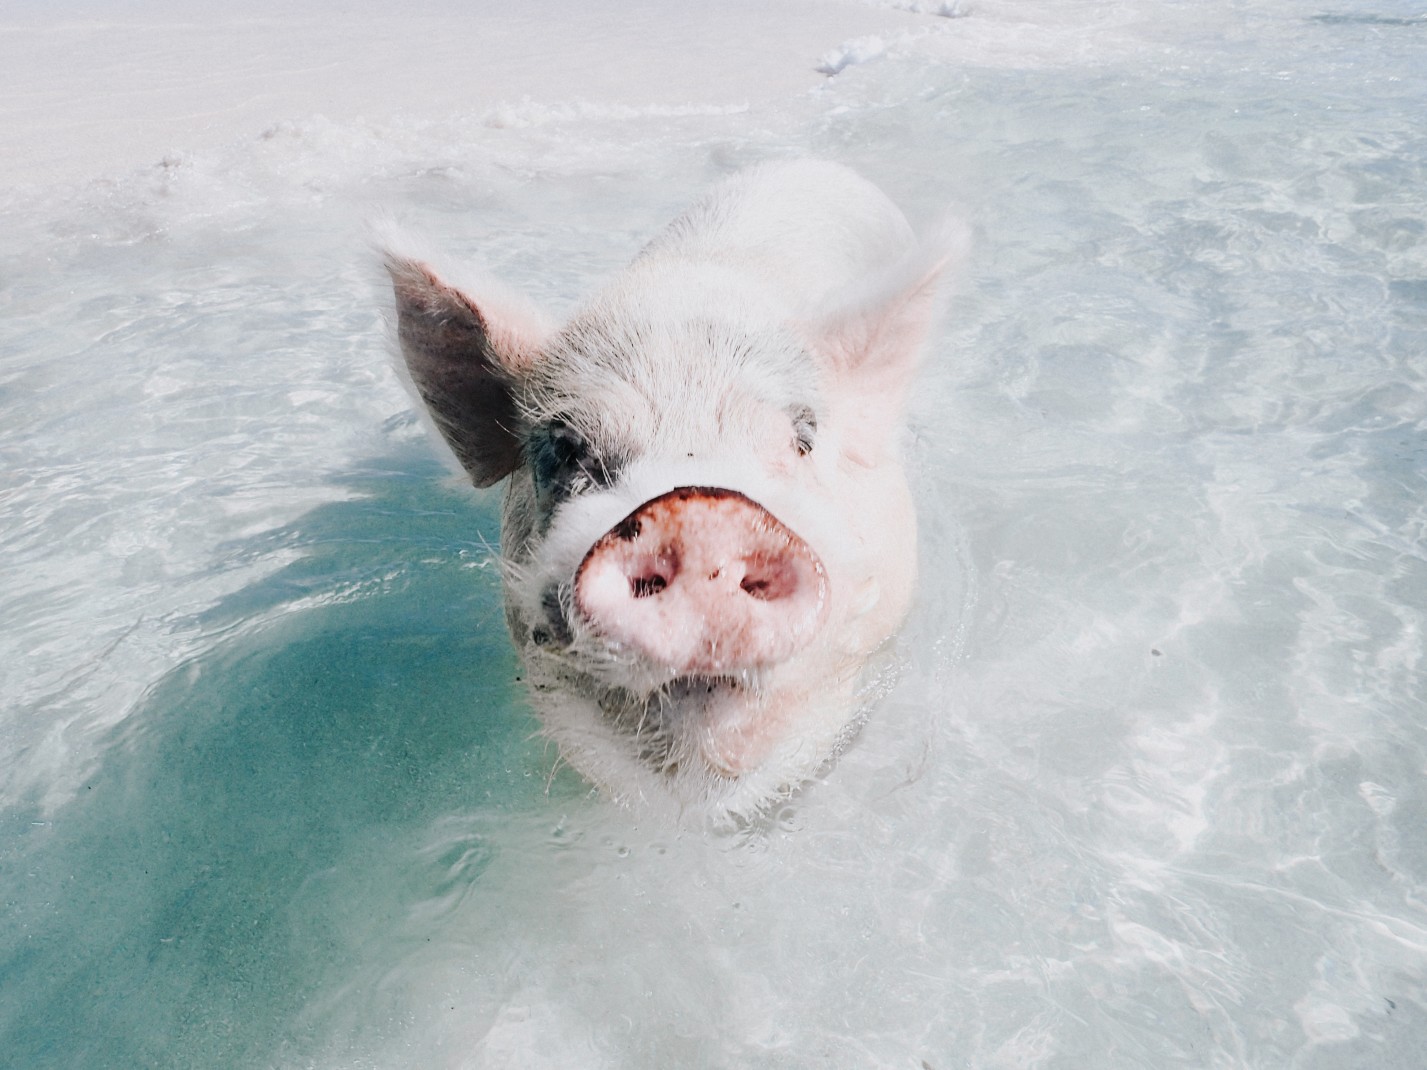 Pig swimming in the water on Pig Beach in the Bahamas